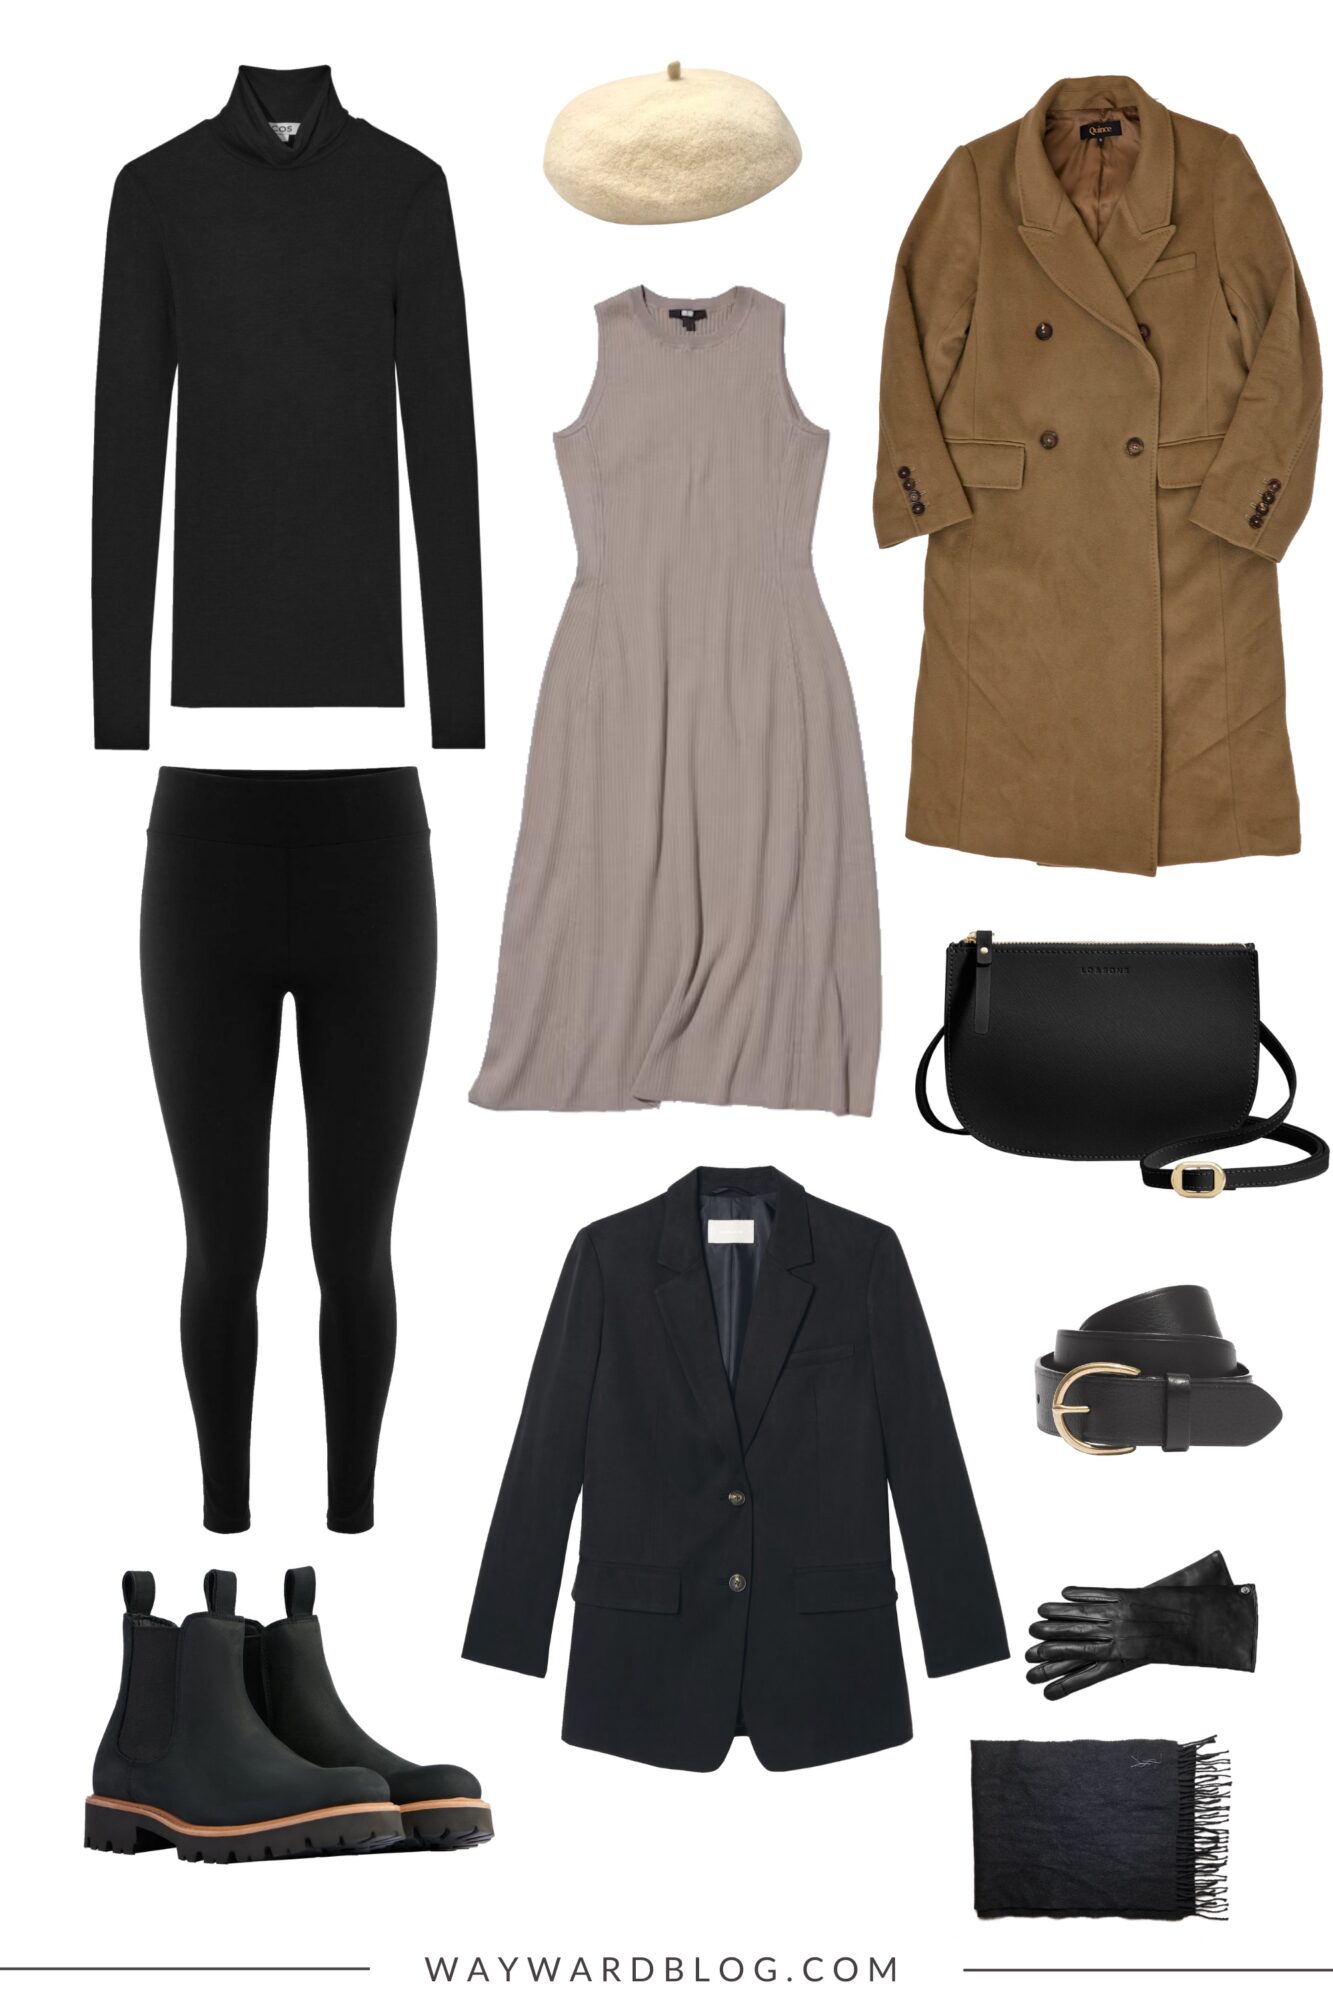 A collage of the garments worn on Saturday night featuring a grey midi dress, camel coat, and black innerwear